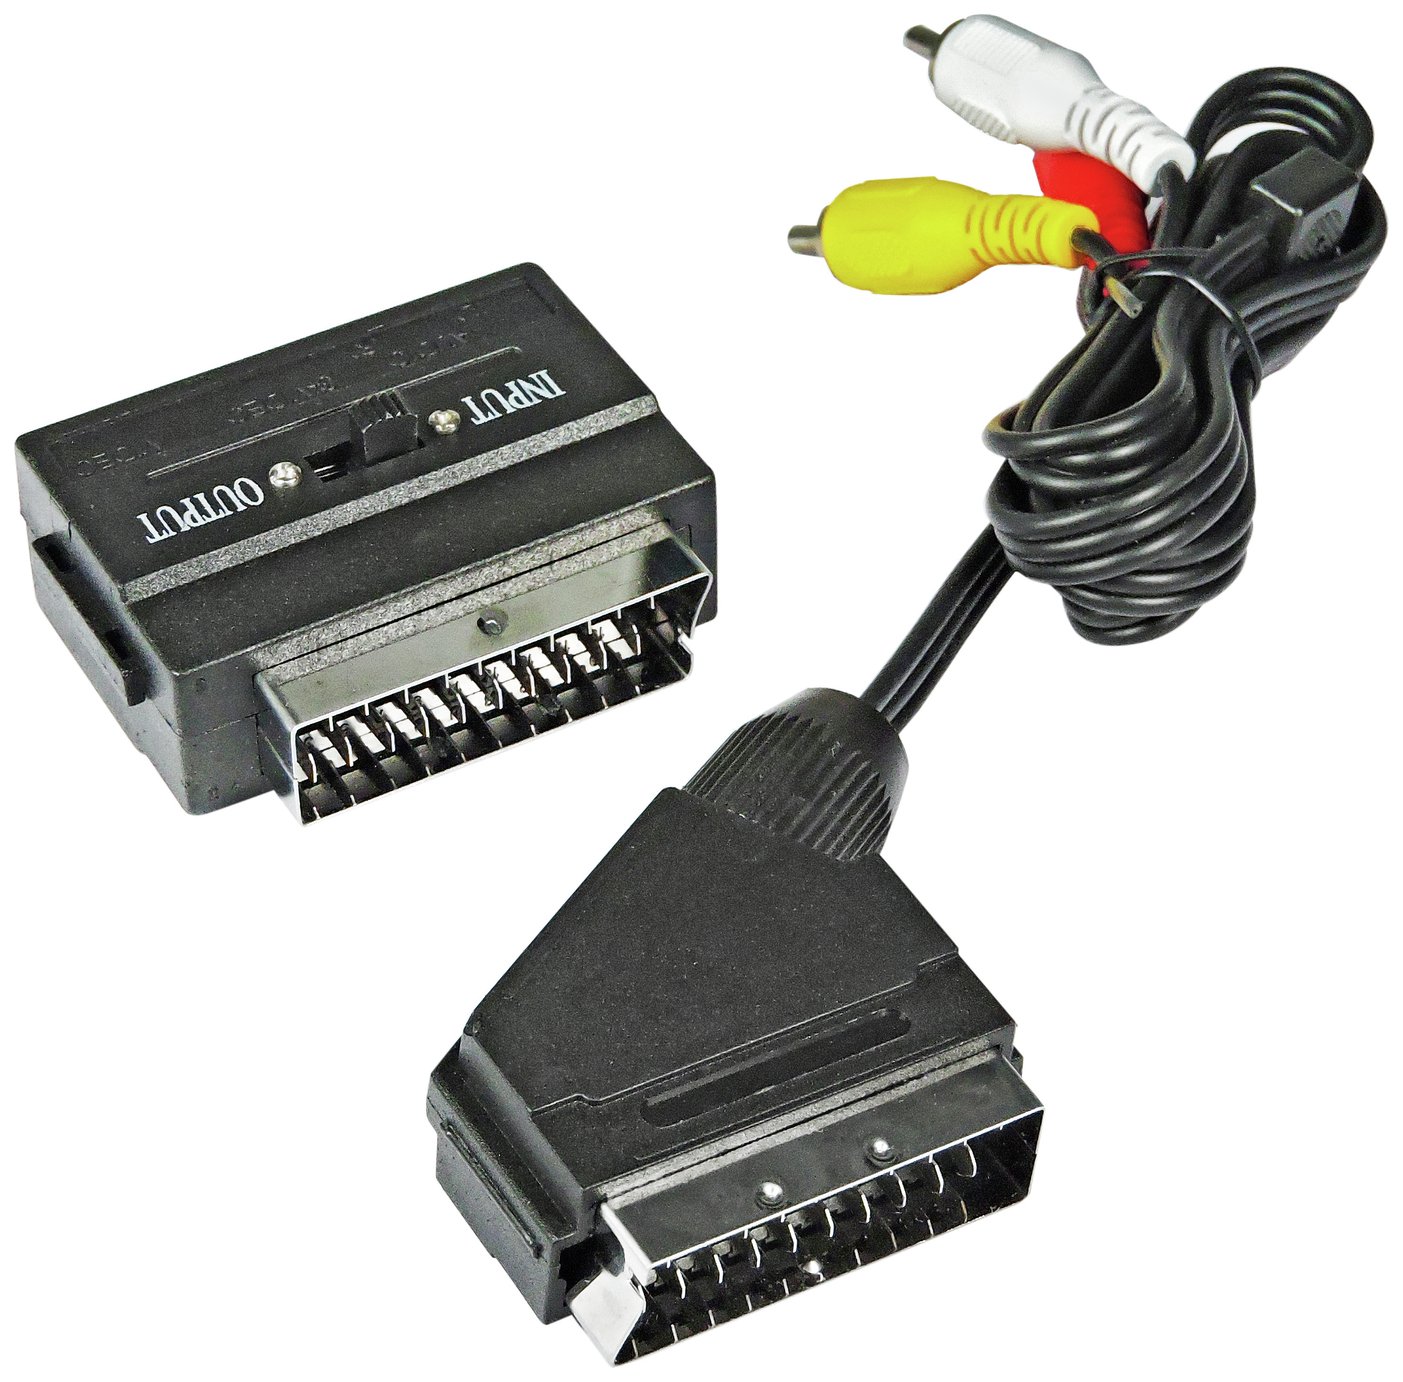 SCART Connecting Kit Review